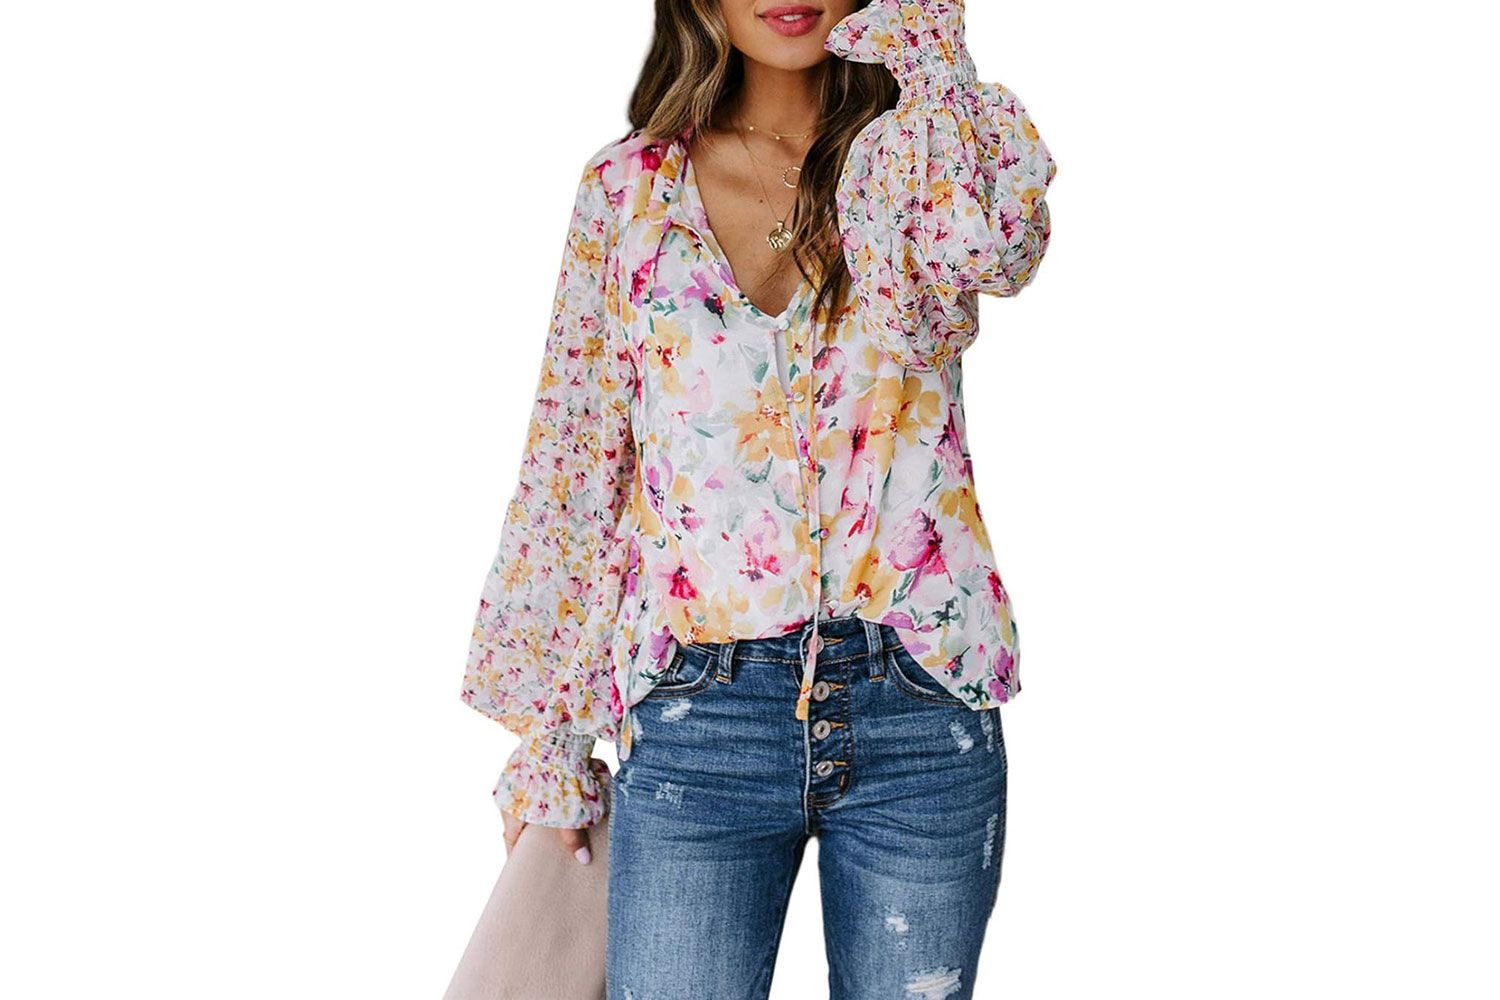 SHEWIN Casual Boho Floral Print Blouse